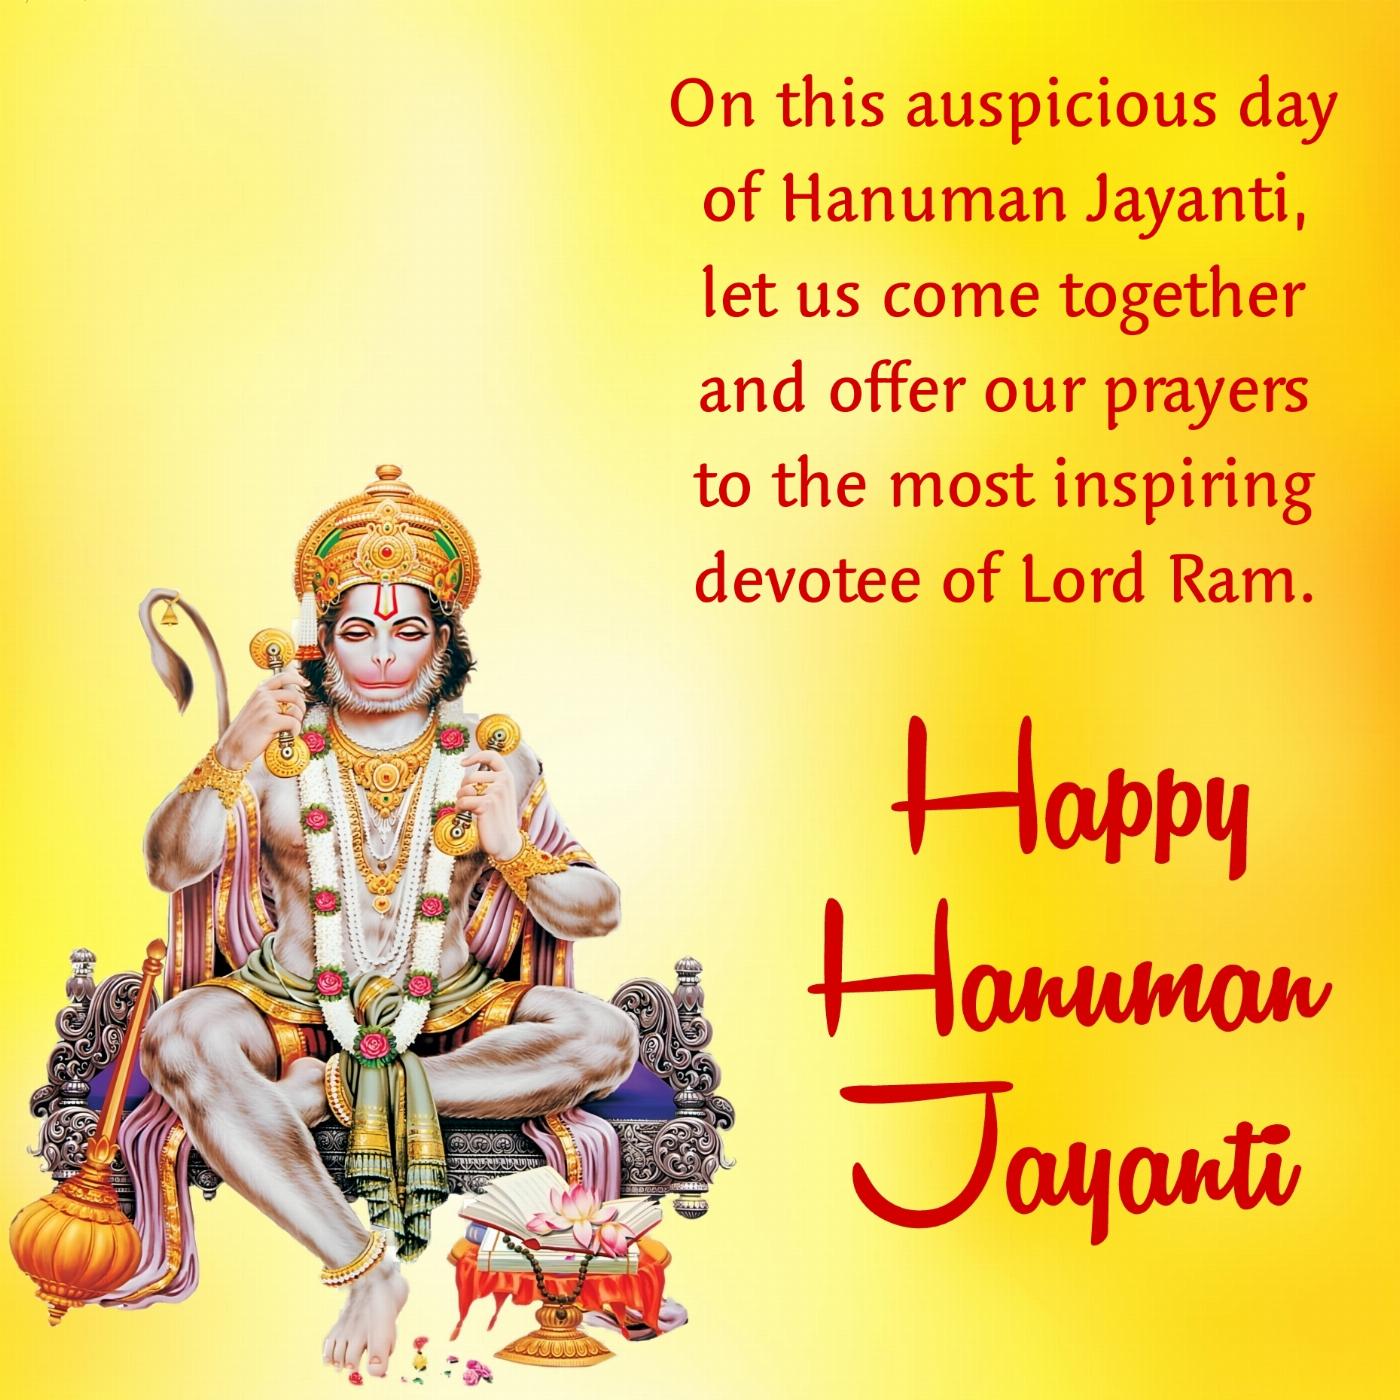 On this auspicious day of Hanuman Jayanti let us come together